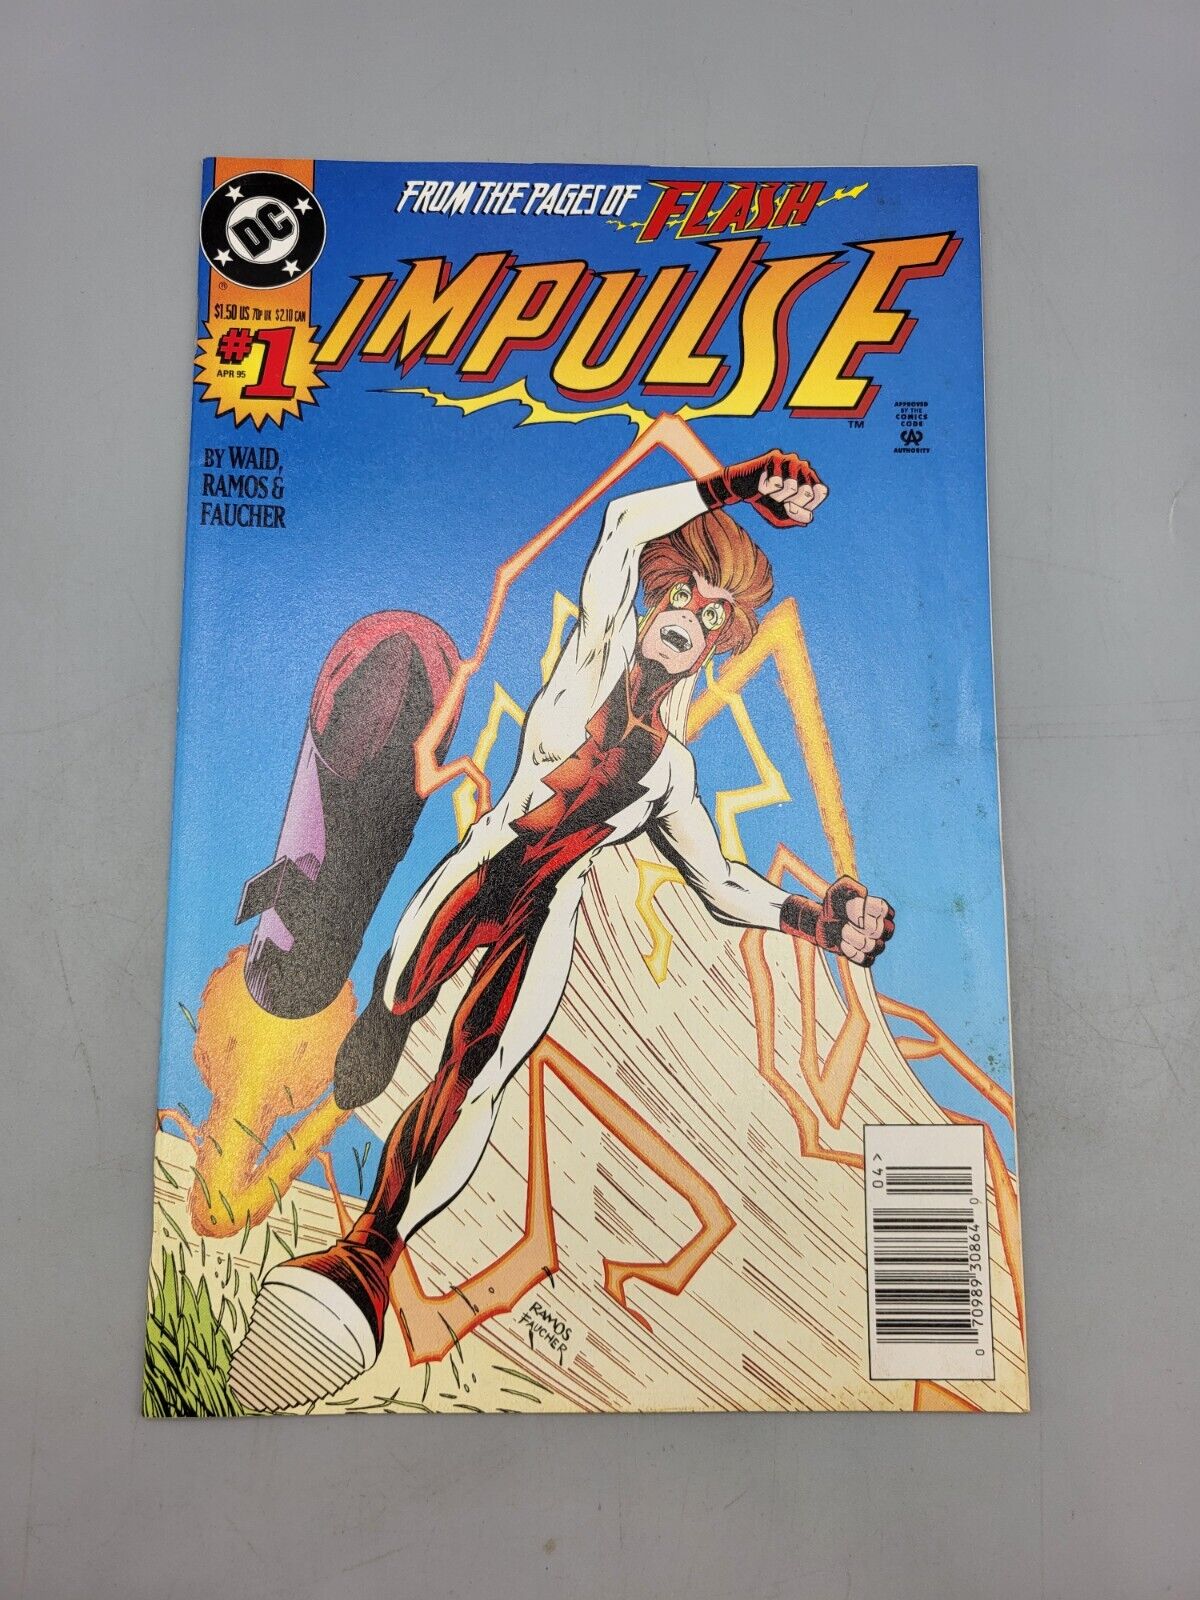 Impulse Volume 1 #1 April 1995 The Single Synapse Theory Newsstand DC Comic Book